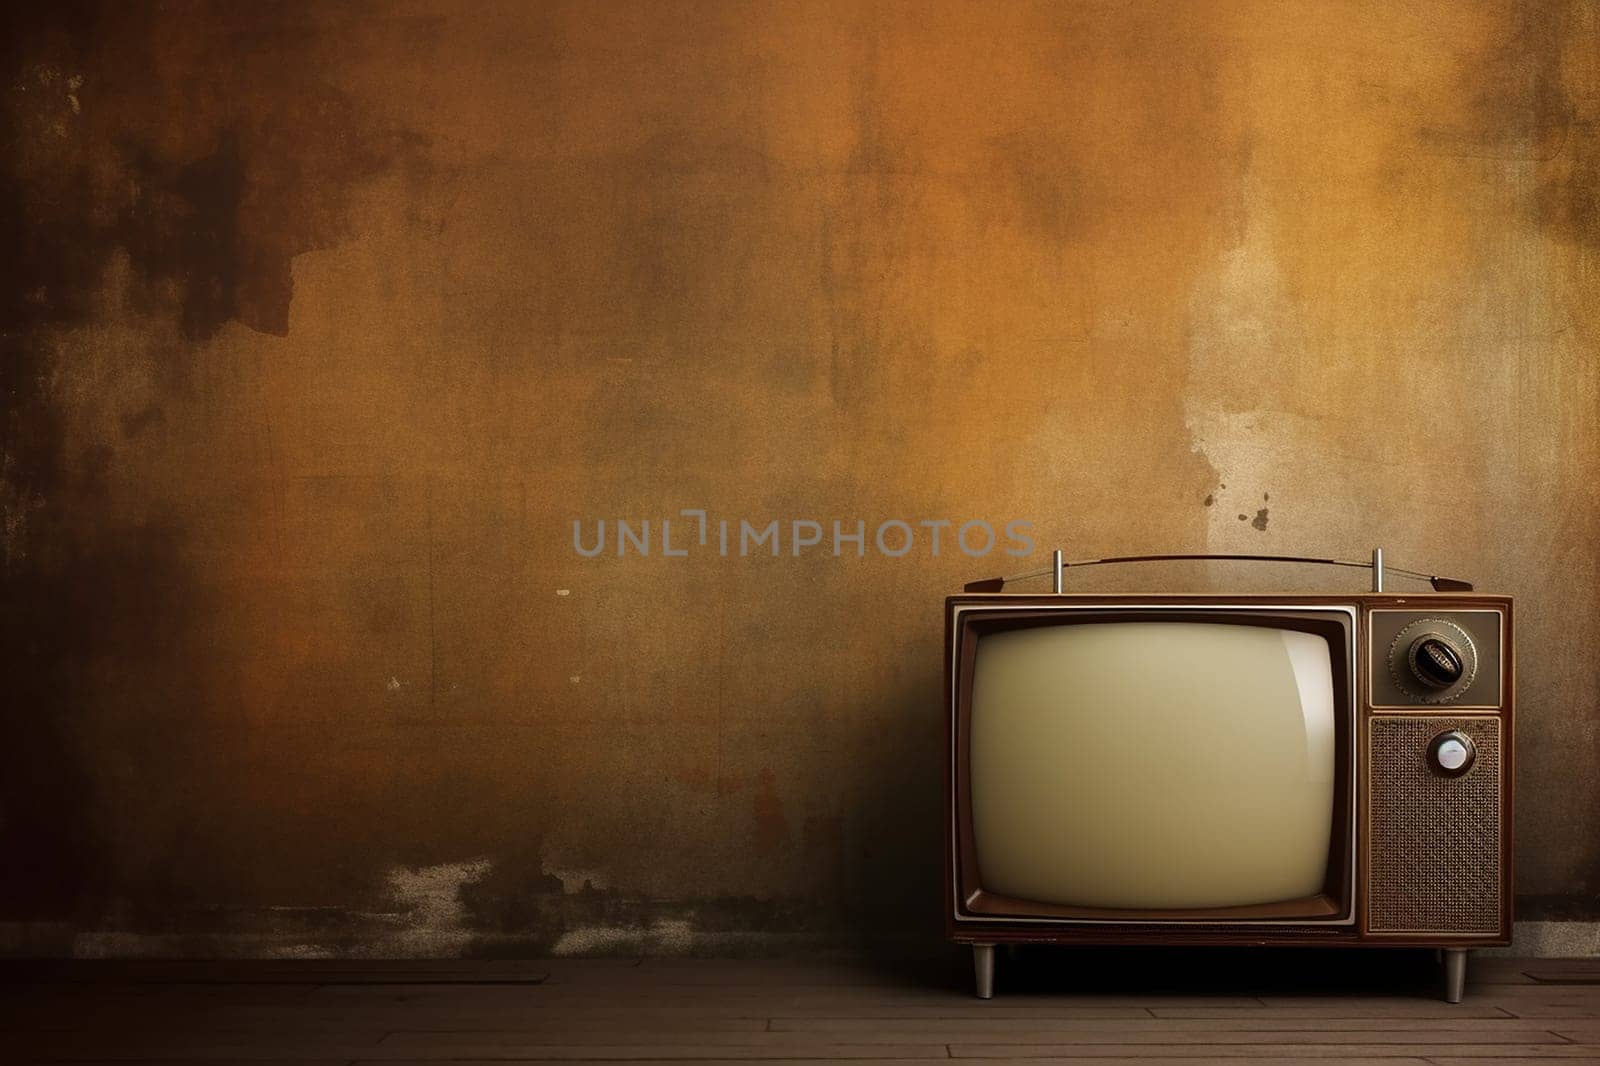 Vintage Television Against a Weathered Wall by Hype2art